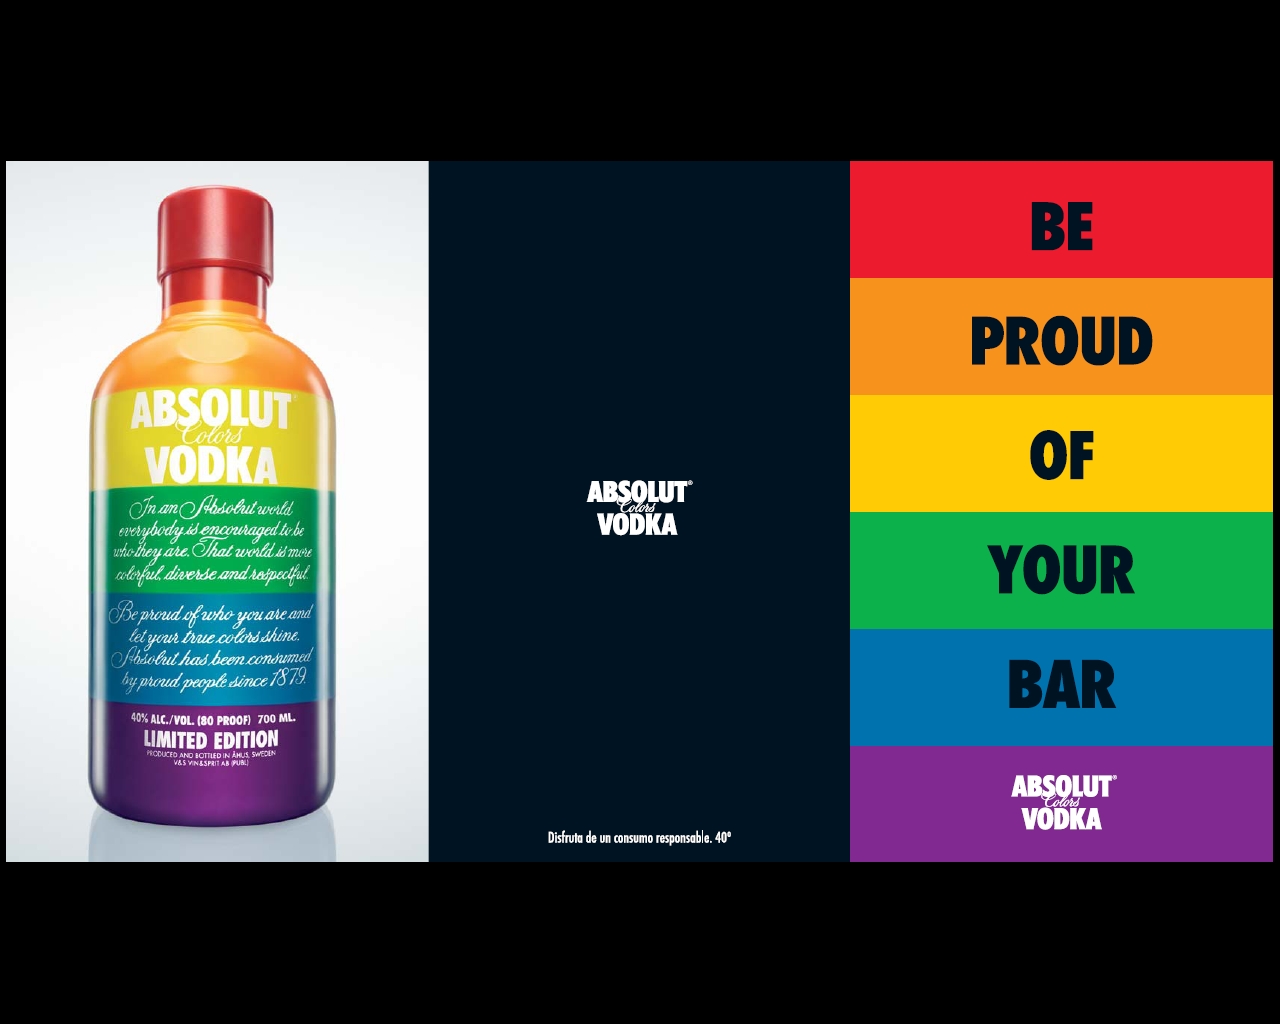 [Absolut+be+proud+of+your+bar.jpg]